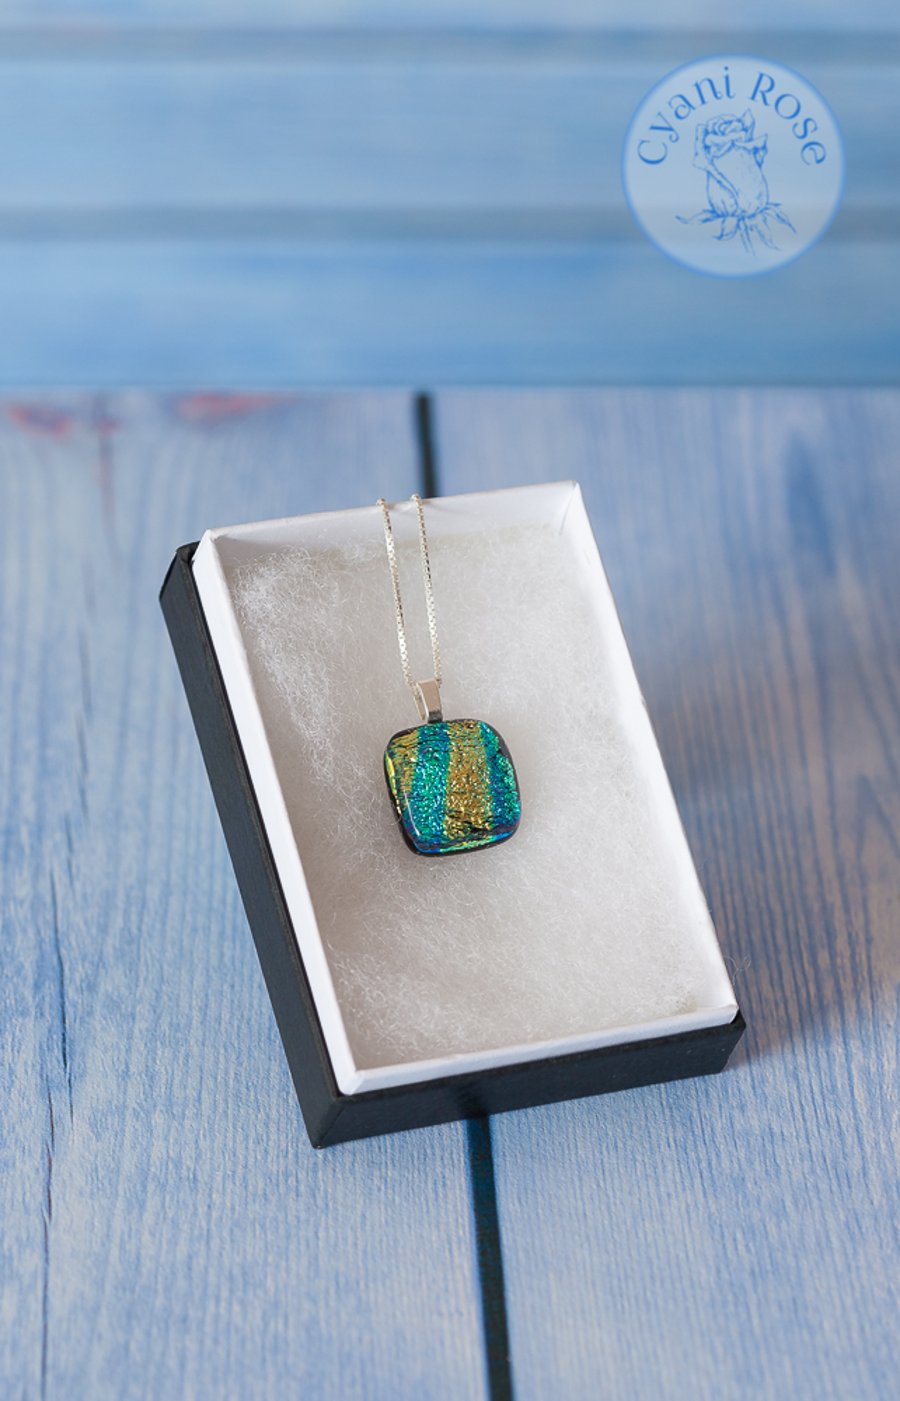 Gorgeous Dichroic fused glass pendent